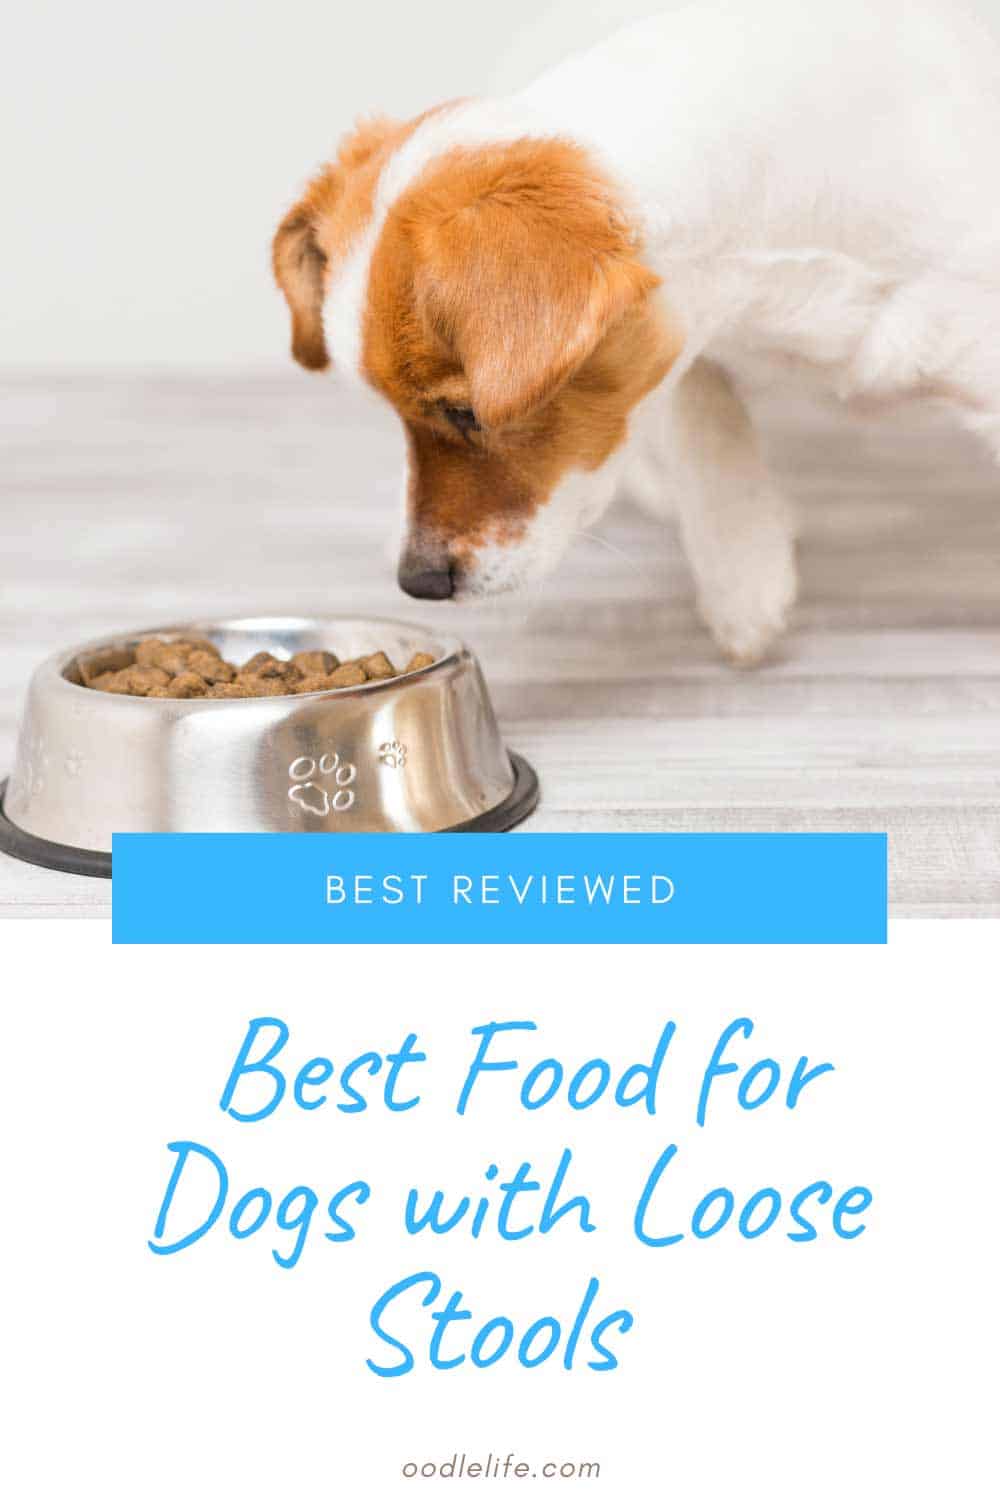 Top 4 Best Dry Dog Food for Loose Stools Oodle Life